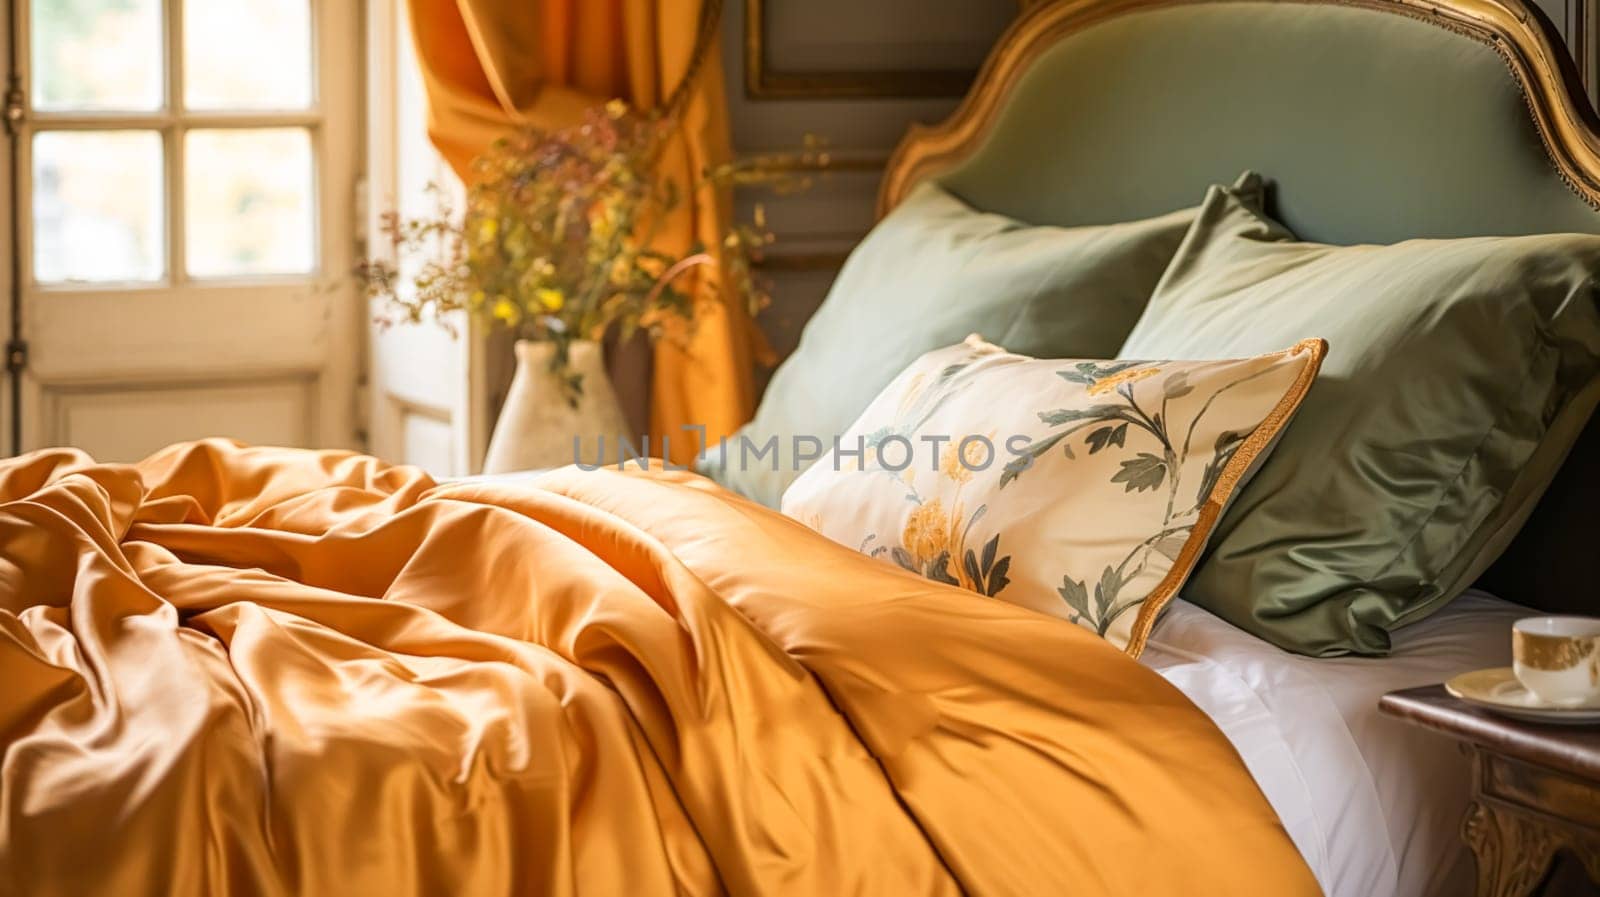 Bedroom decor, interior design and autumnal home decor, bed with silk satin bedding, bespoke furniture and autumn decoration, English country house, holiday rental and cottage style by Anneleven